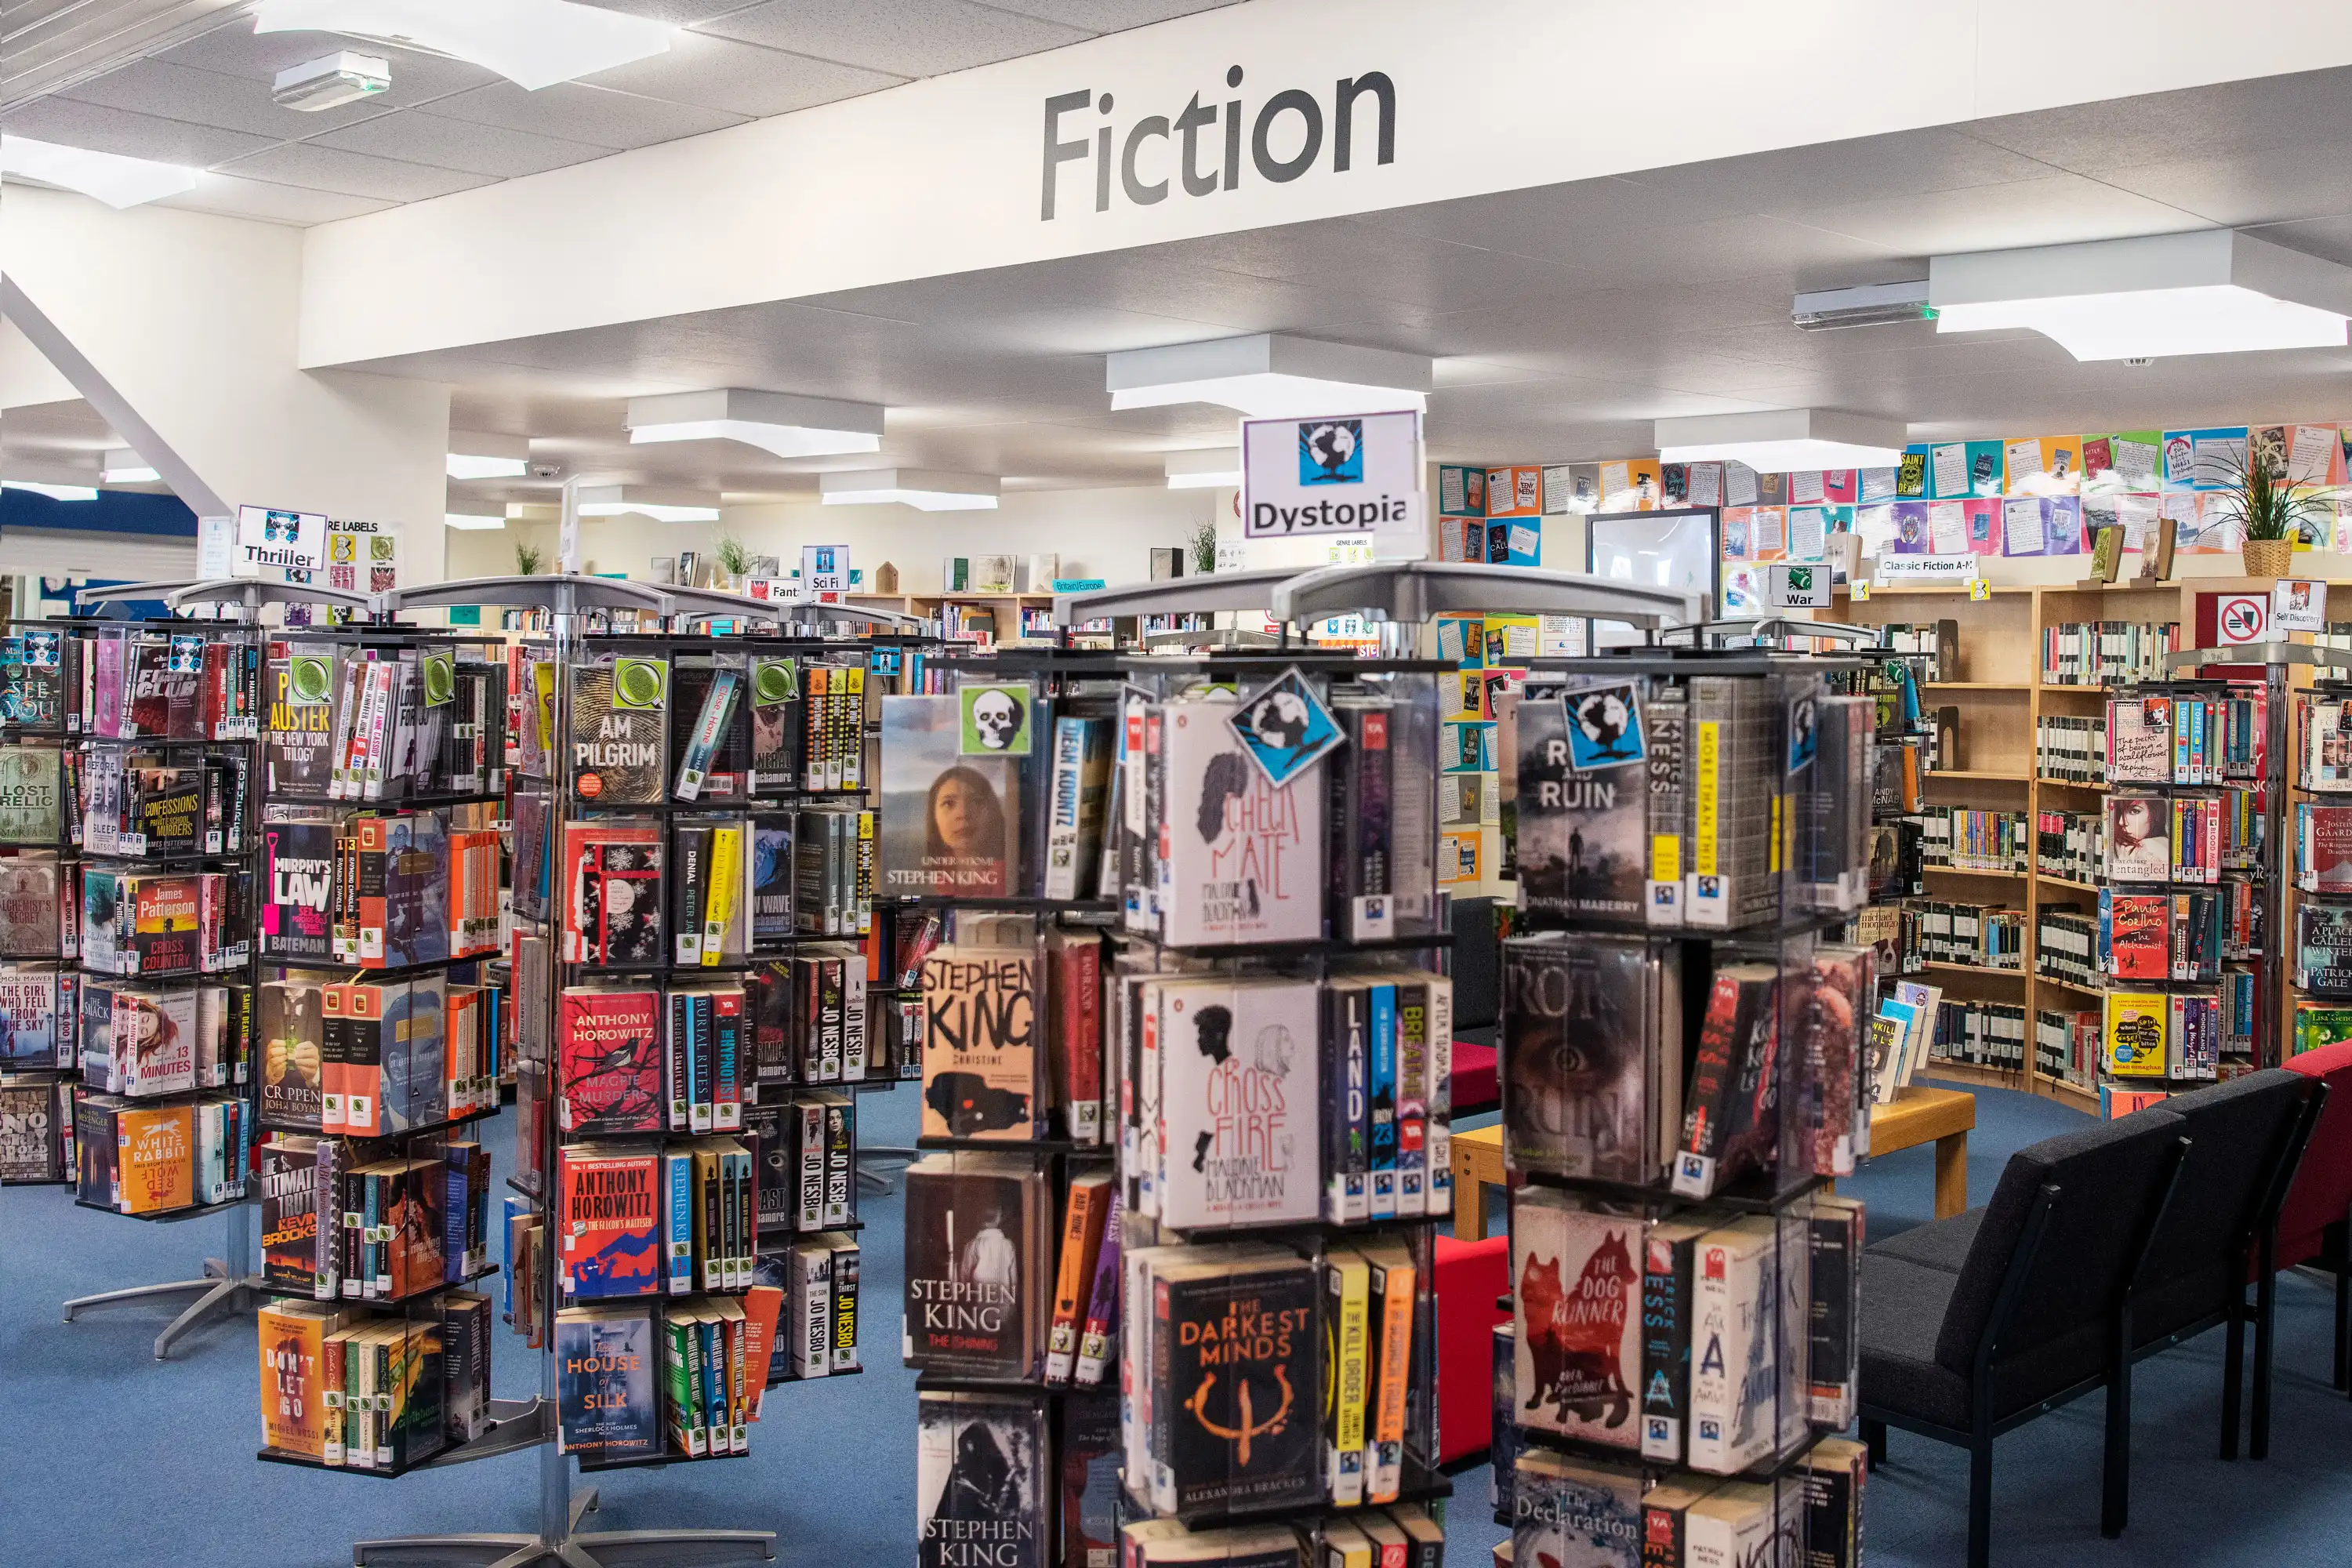 Fiction Section